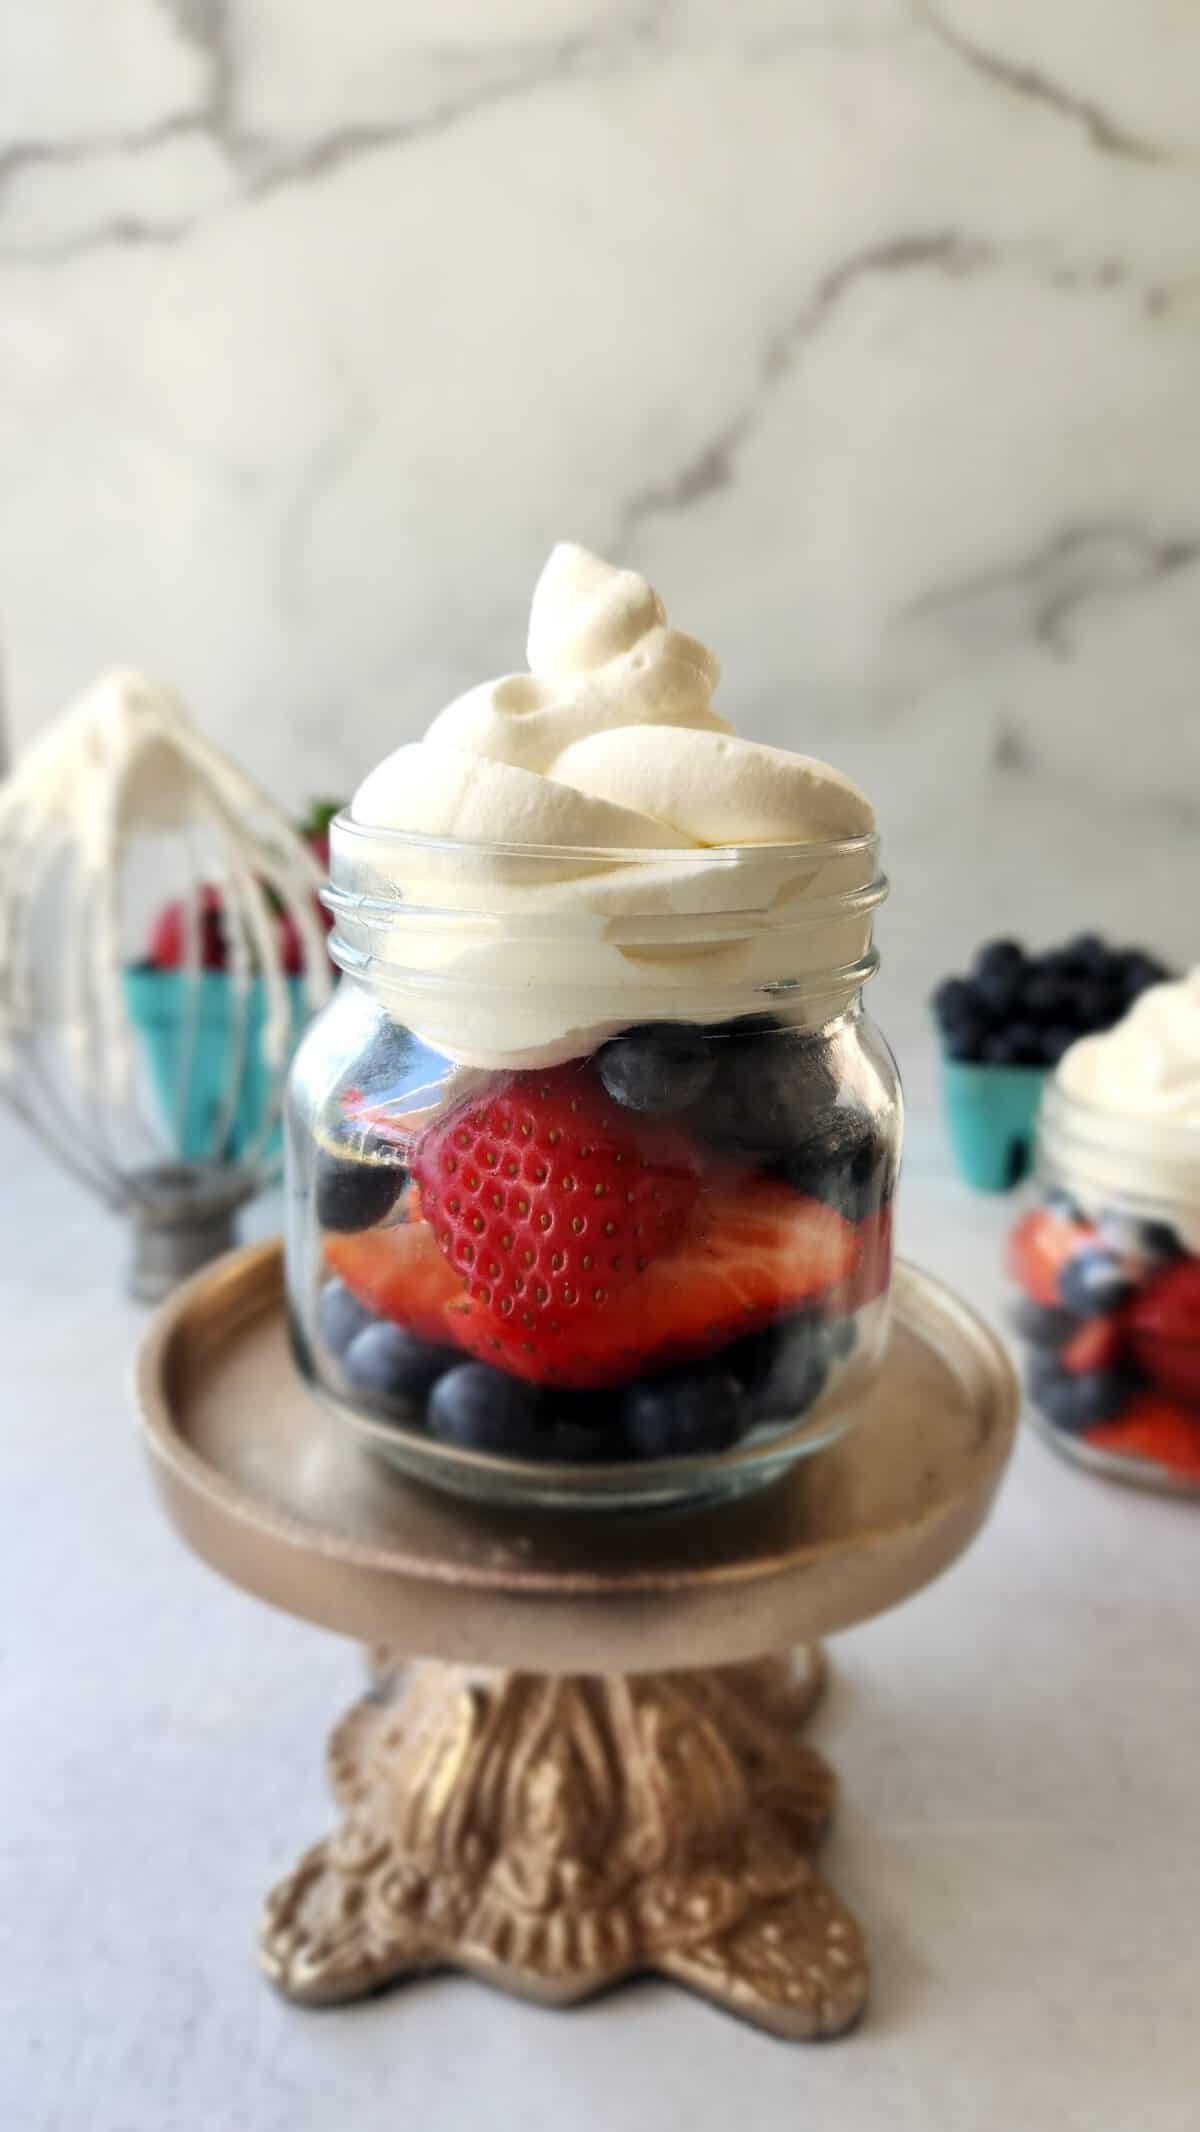 final shot of a small glass with berries and fresh whipped cream on top